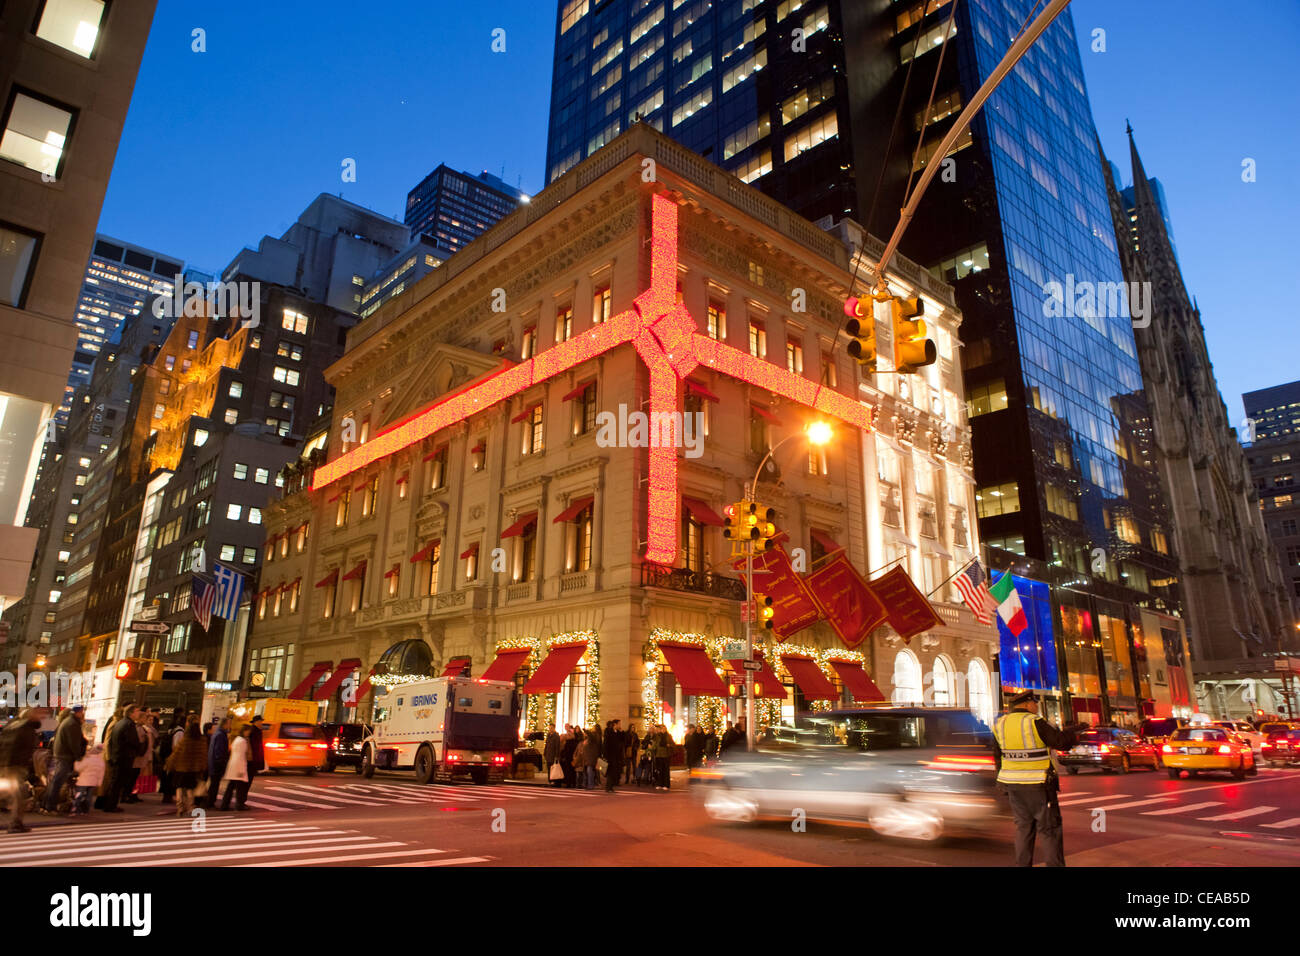 Cartier Store New York Banque d'image 